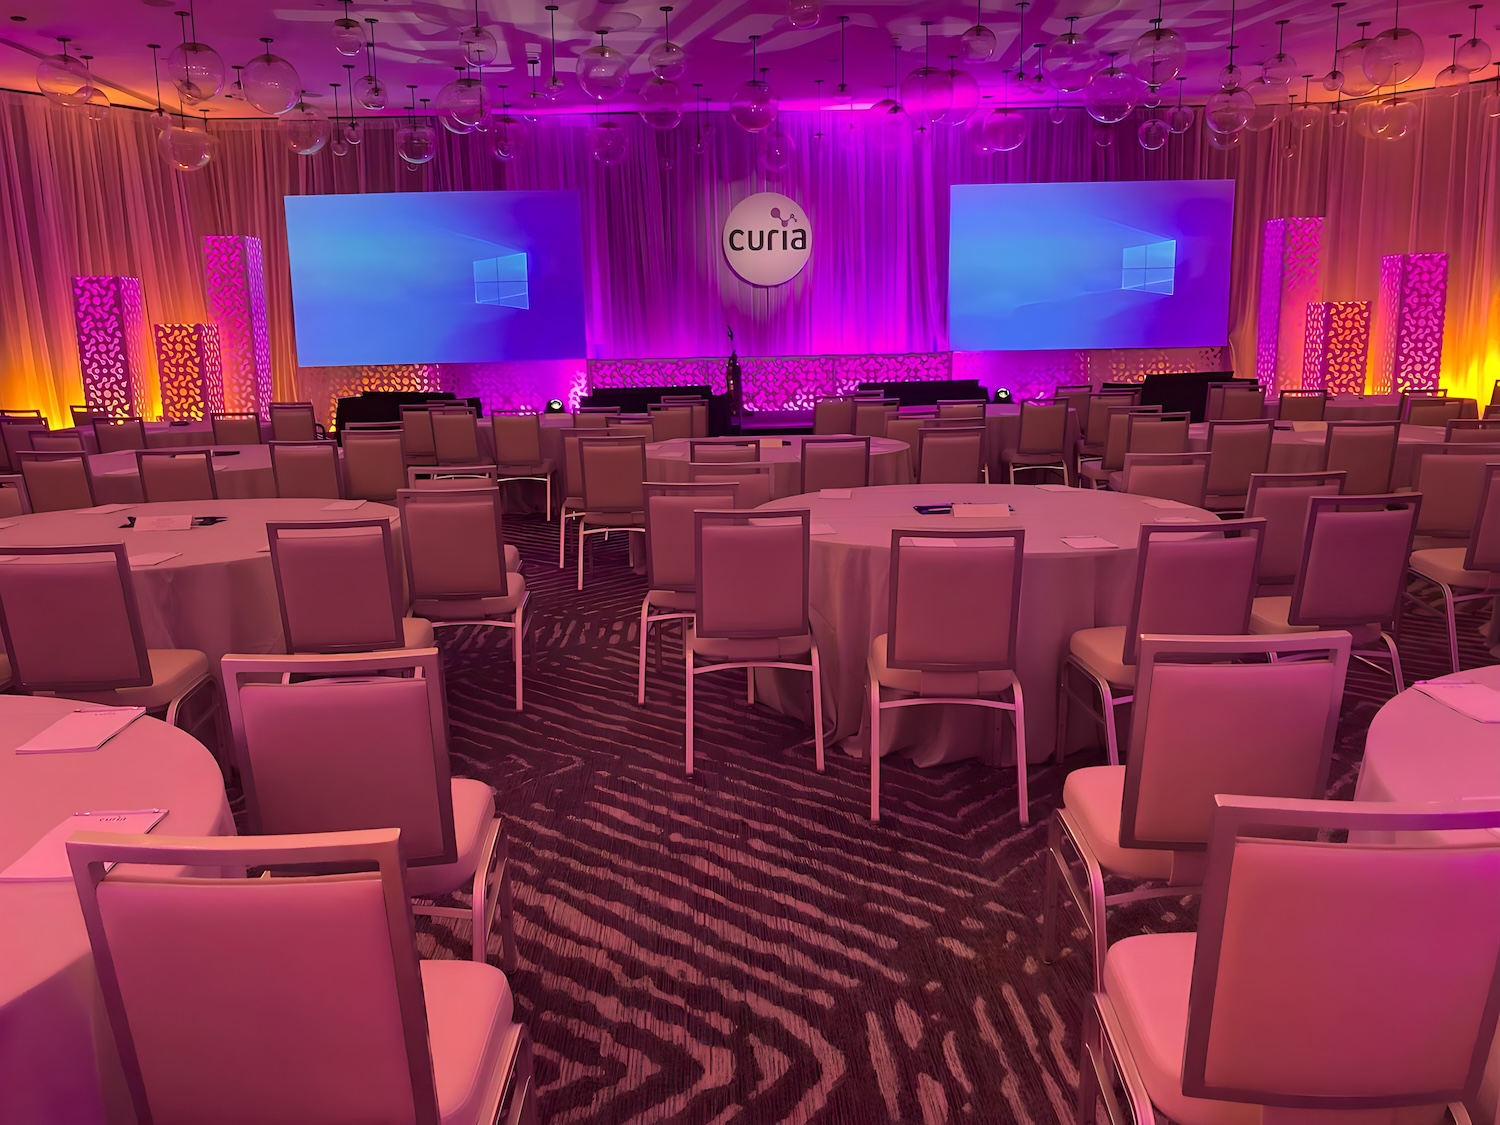 A Miami conference setup with round tables and pink lighting, a stage with a large screen displaying a graphic, and the branding 'curia' prominently featured.